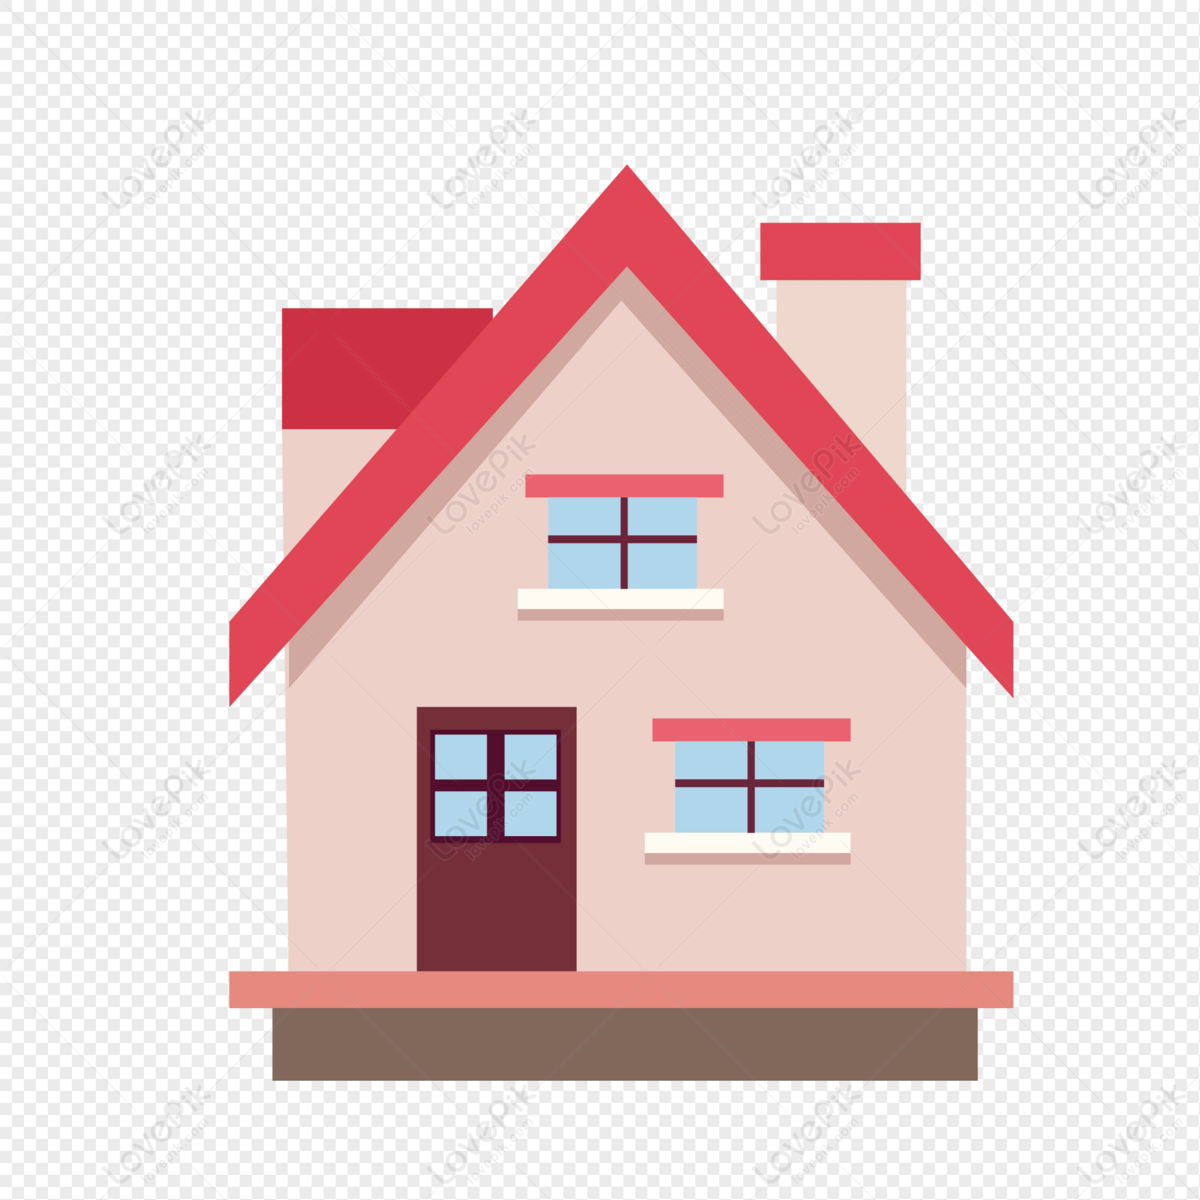 Red House PNG Transparent Image And Clipart Image For Free Download ...